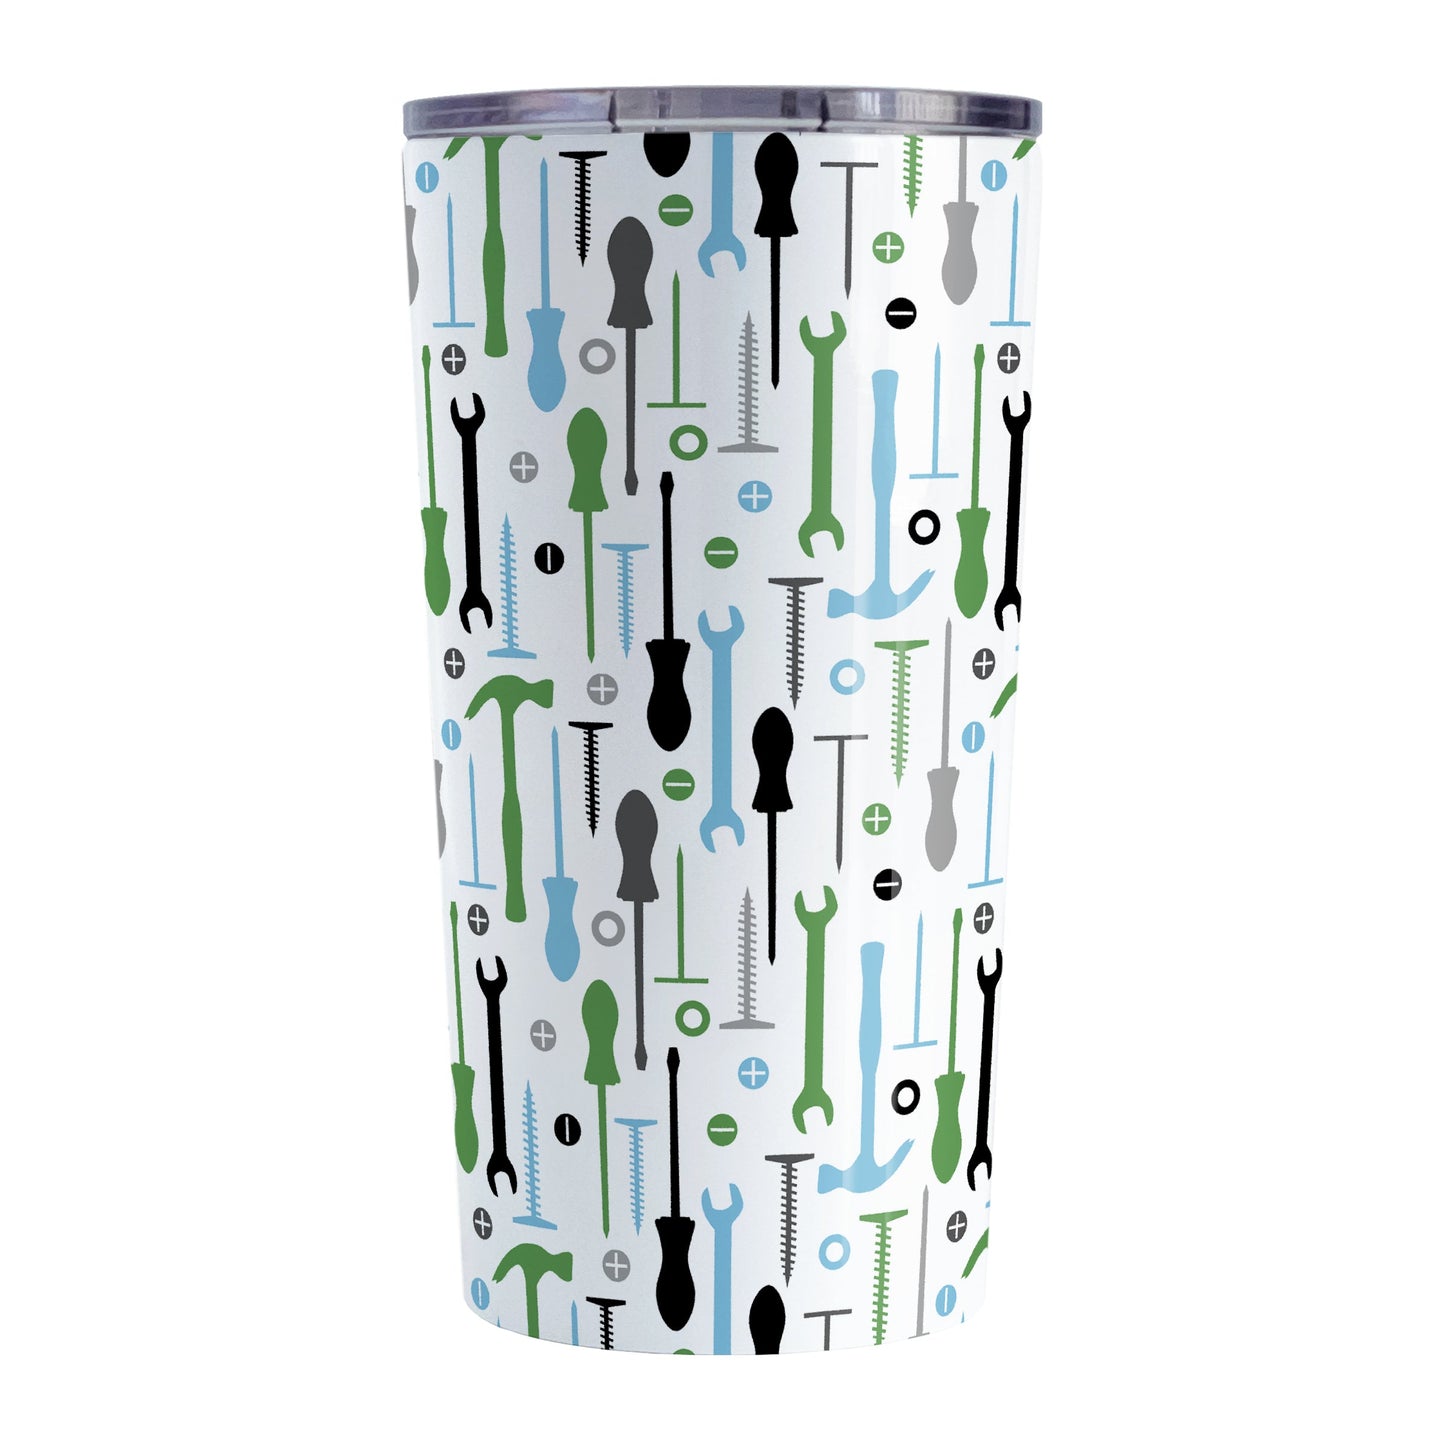 Green Blue Tools Pattern Tumbler Cup (20oz, stainless steel insulated) at Amy's Coffee Mugs. A tumbler cup with a modern style pattern of tools in green, blue, black, and gray over white that wraps around the cup. Perfect for any handyman or contractor. 